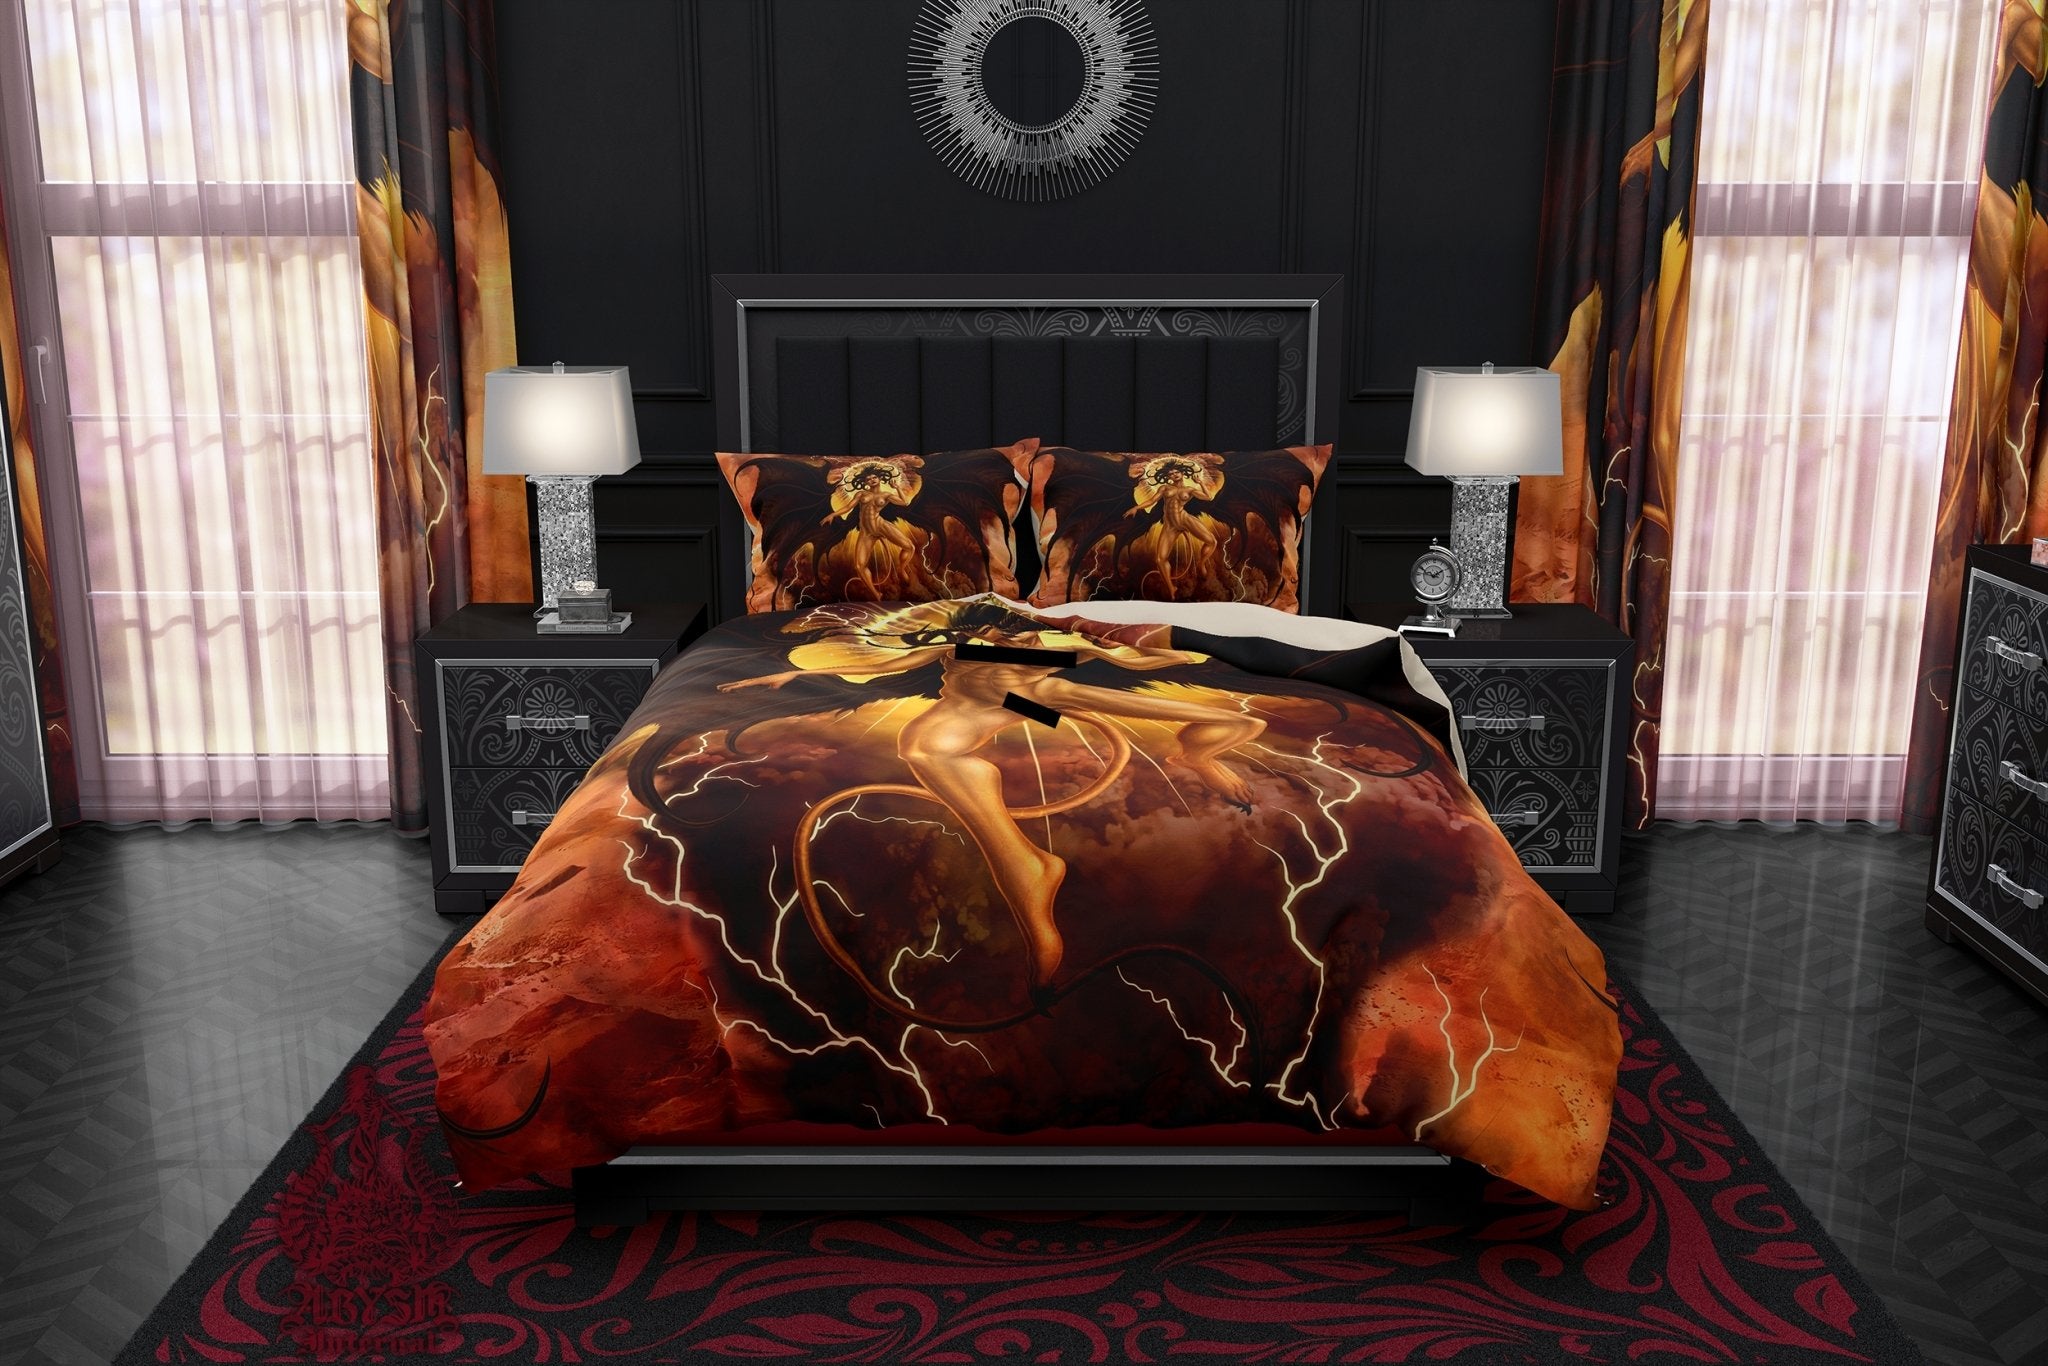 Lilith Bedding Set, Comforter and Duvet, Dark Erotic Art, Satanic Room, Sexy Demoness, Alternative Bed Cover and Bedroom Decor, King, Queen and Twin Size - Nude - Abysm Internal